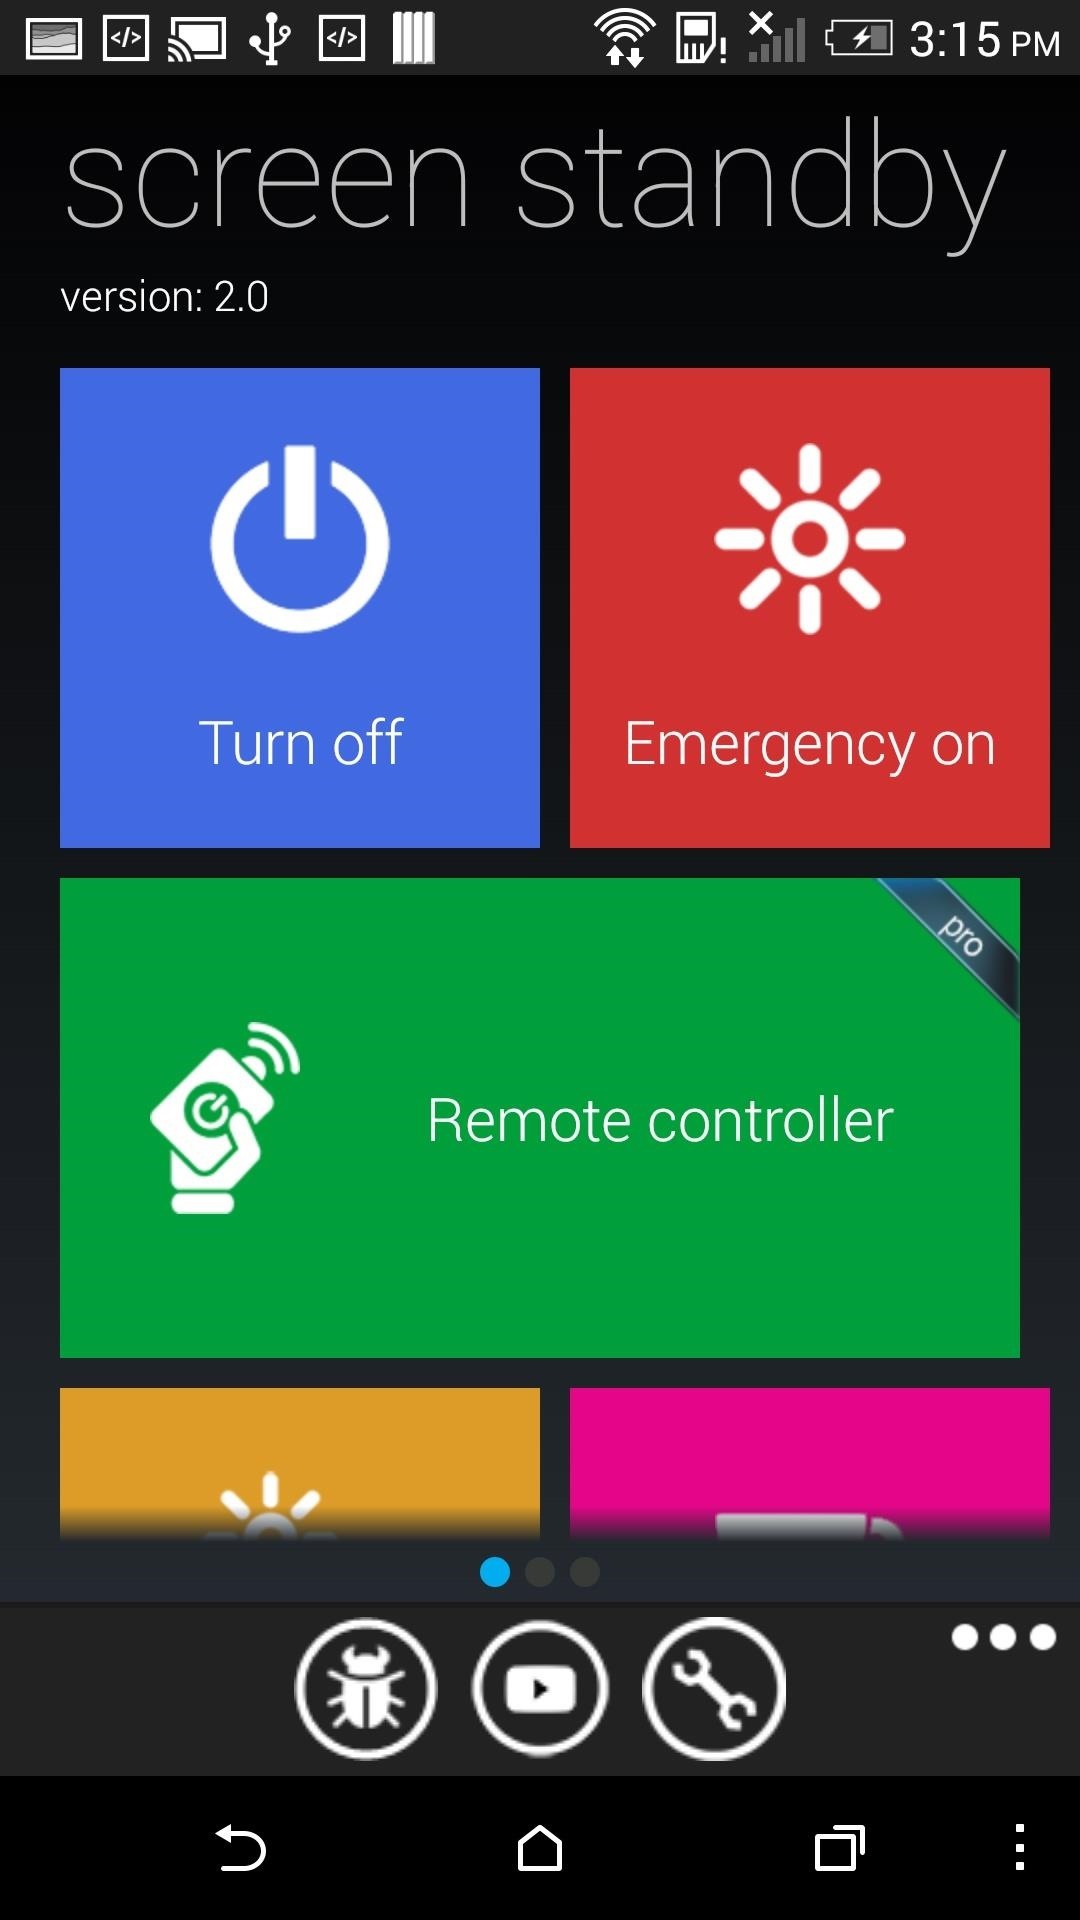 Save Battery by Mirroring Your Android Screen to Chromecast with the Display Off